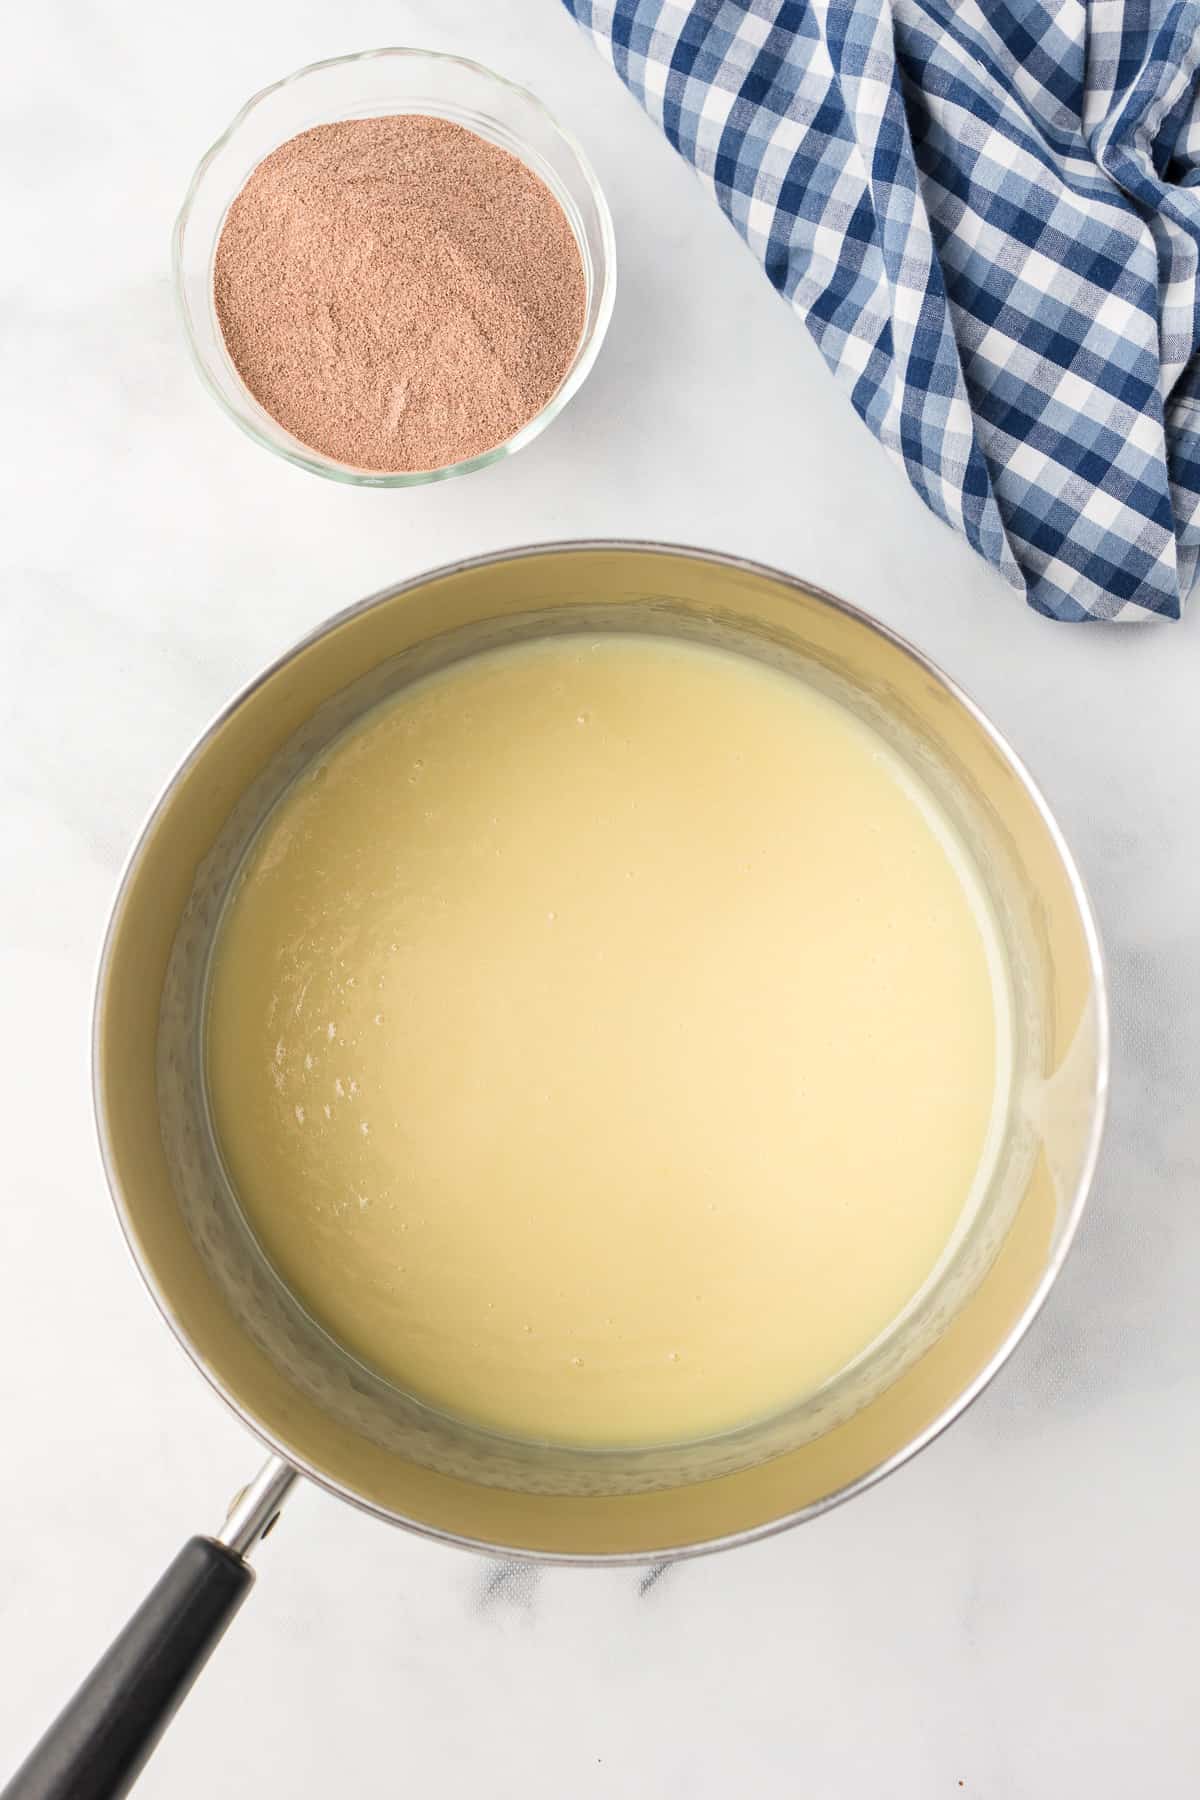 Sweetened condensed milk mixture in a pan from above with hot cocoa mix in a bowl nearby on the counter.